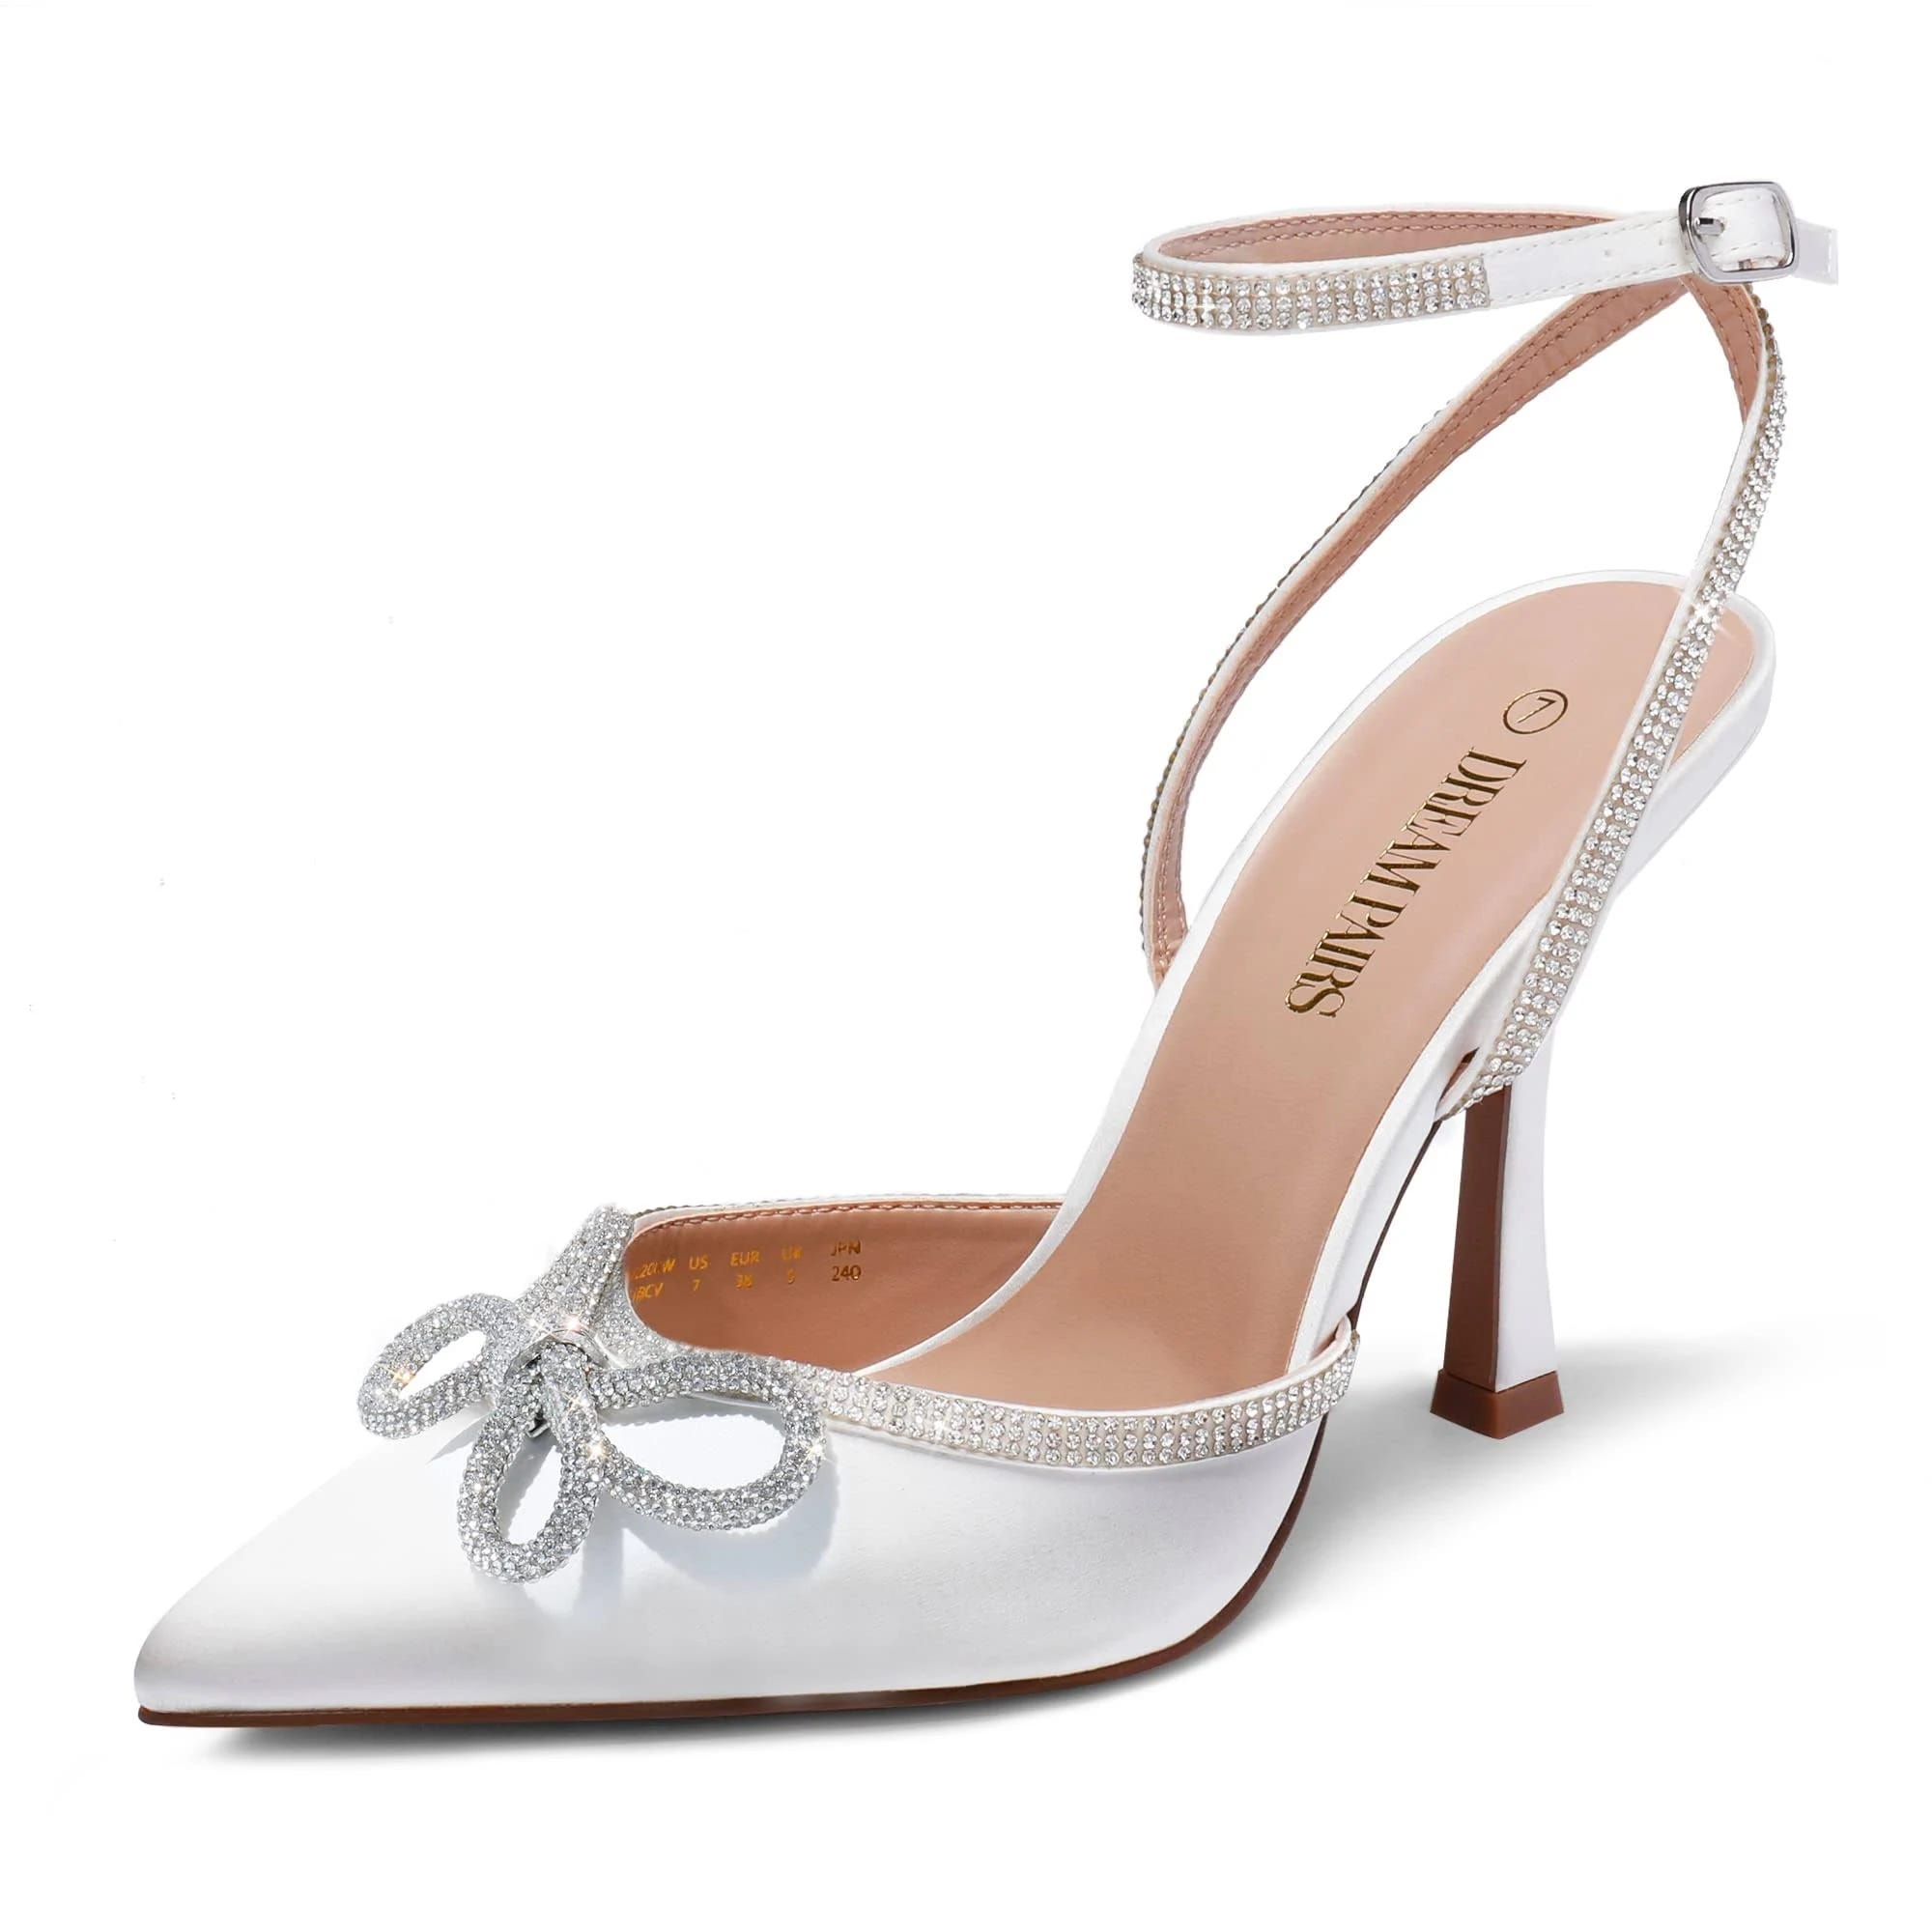 Glamorous White Closed Toe Heels with Non-slip Outsole | Image